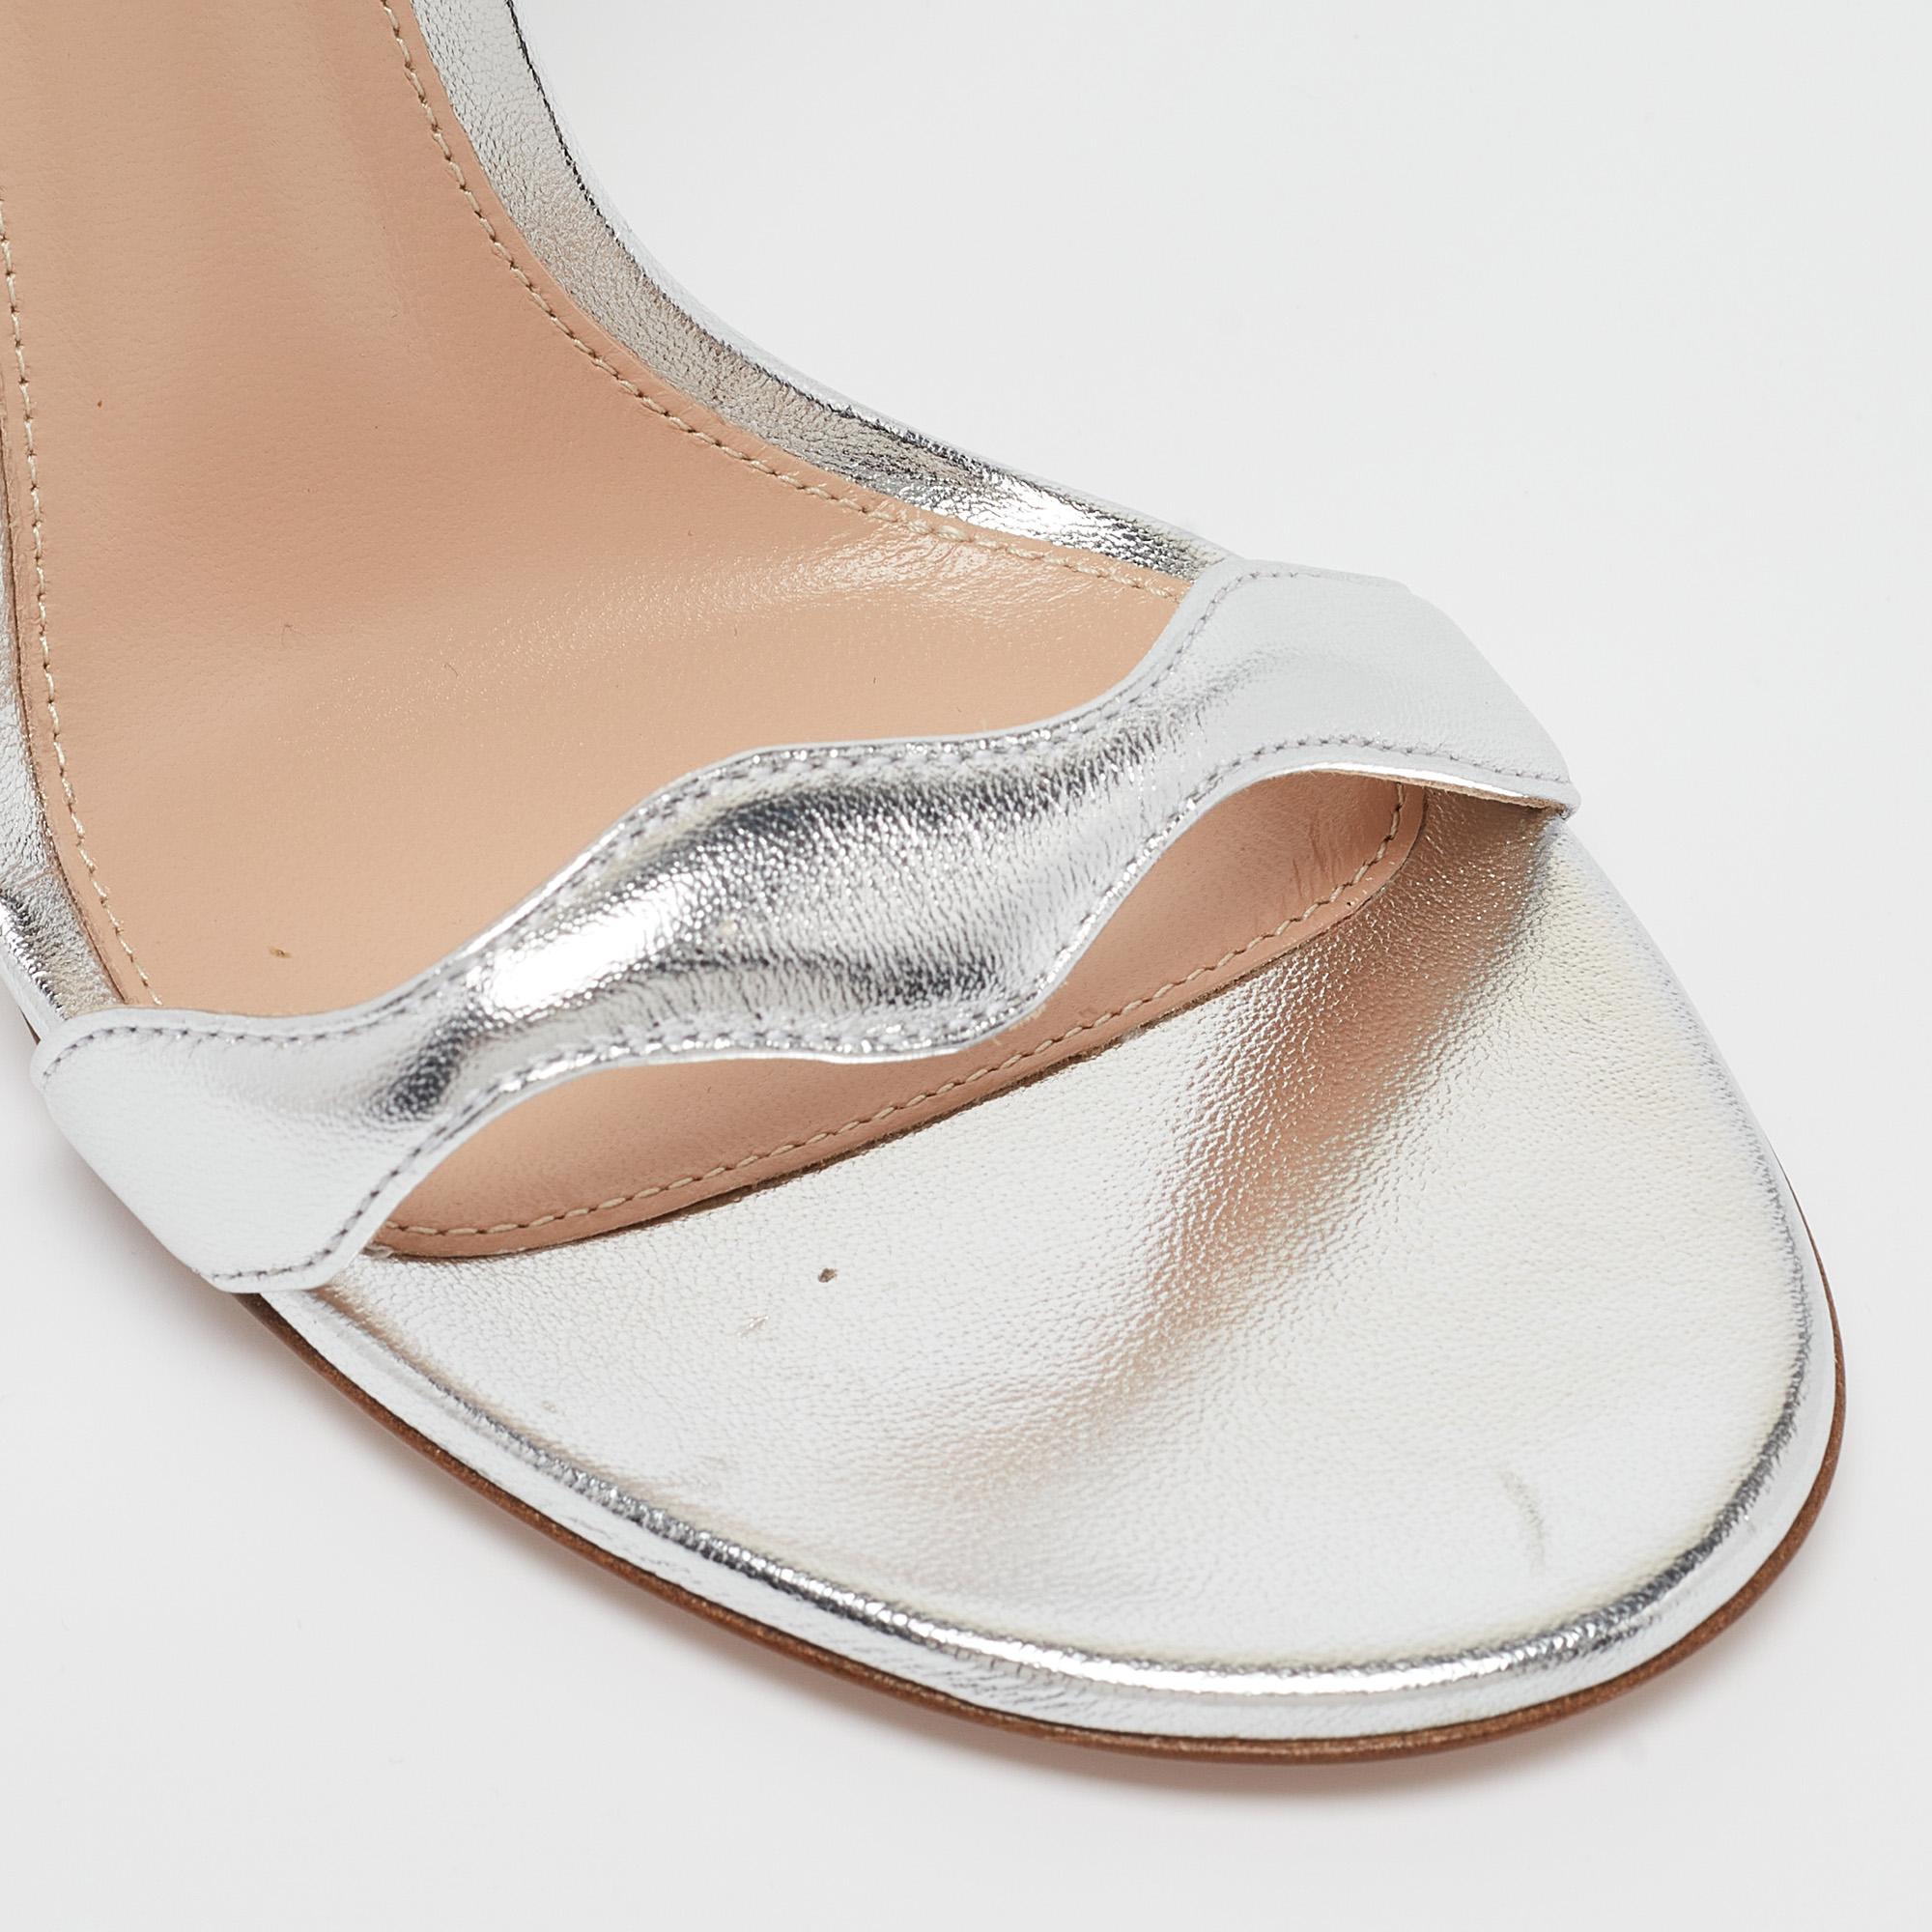 Gianvito Rossi Silver Leather Wavy Ankle Tie Sandals Size 37.5 For Sale 2